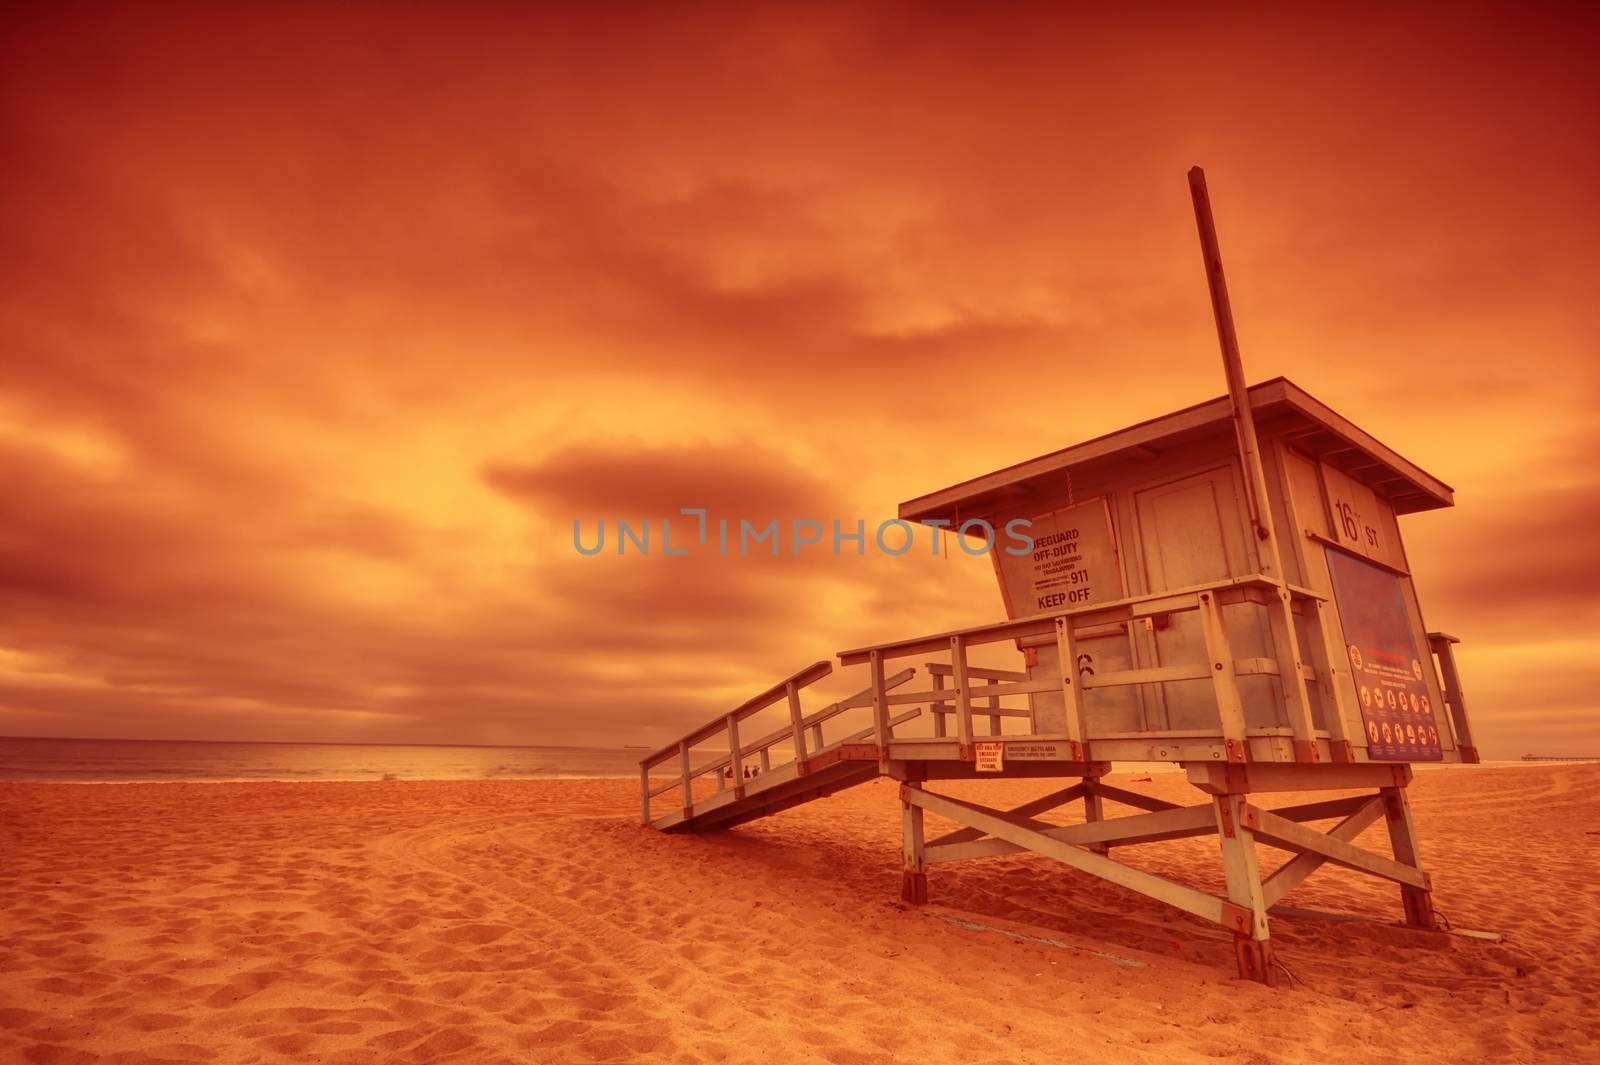 Lifeguard tower with the rosy afterglow of a sunset at Hermosa Beach, California